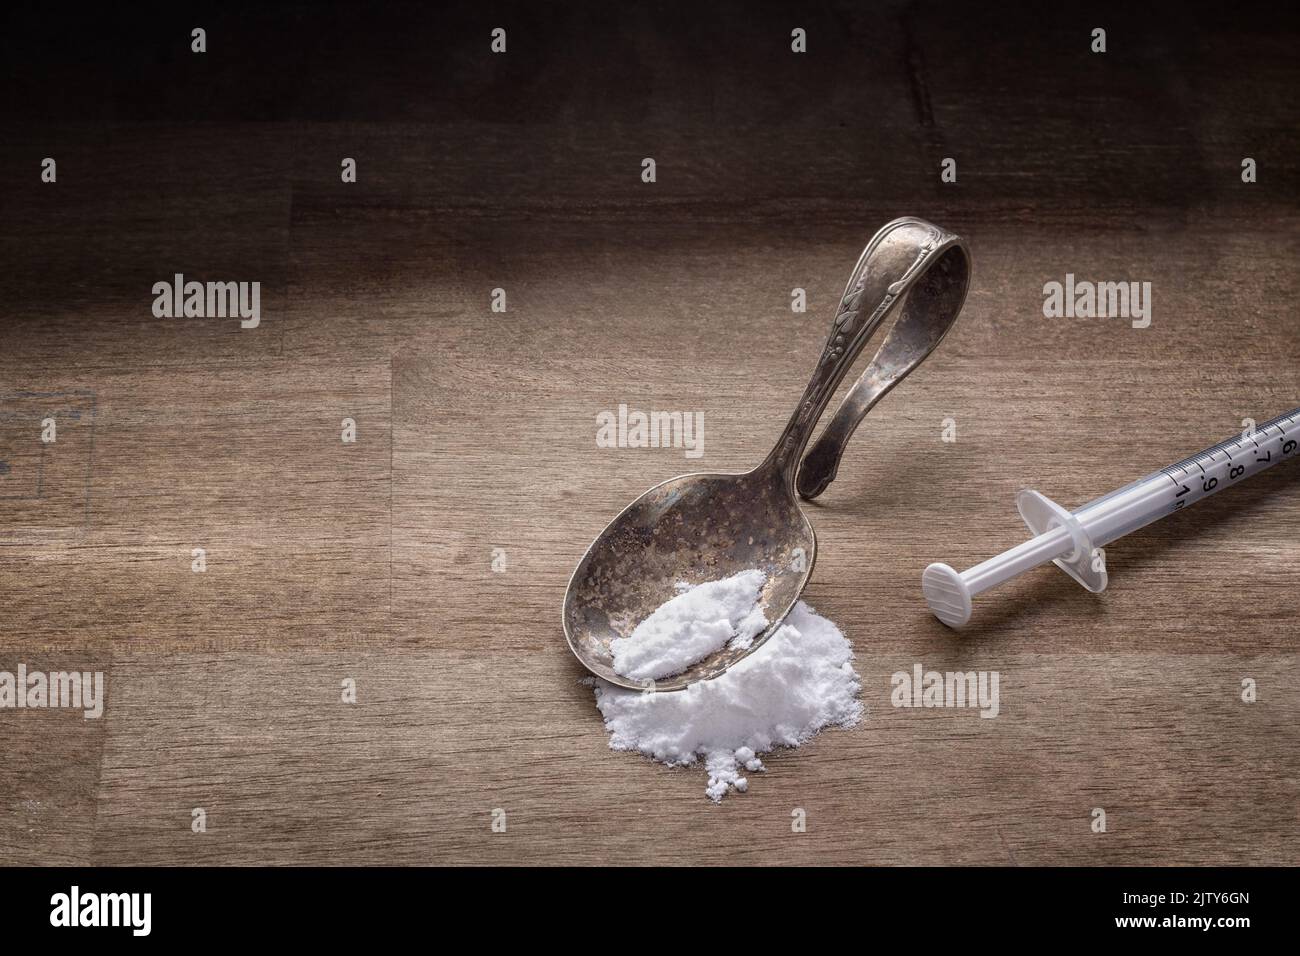 Drug addiction concept with spoon, syringe and white powder on wood Stock Photo